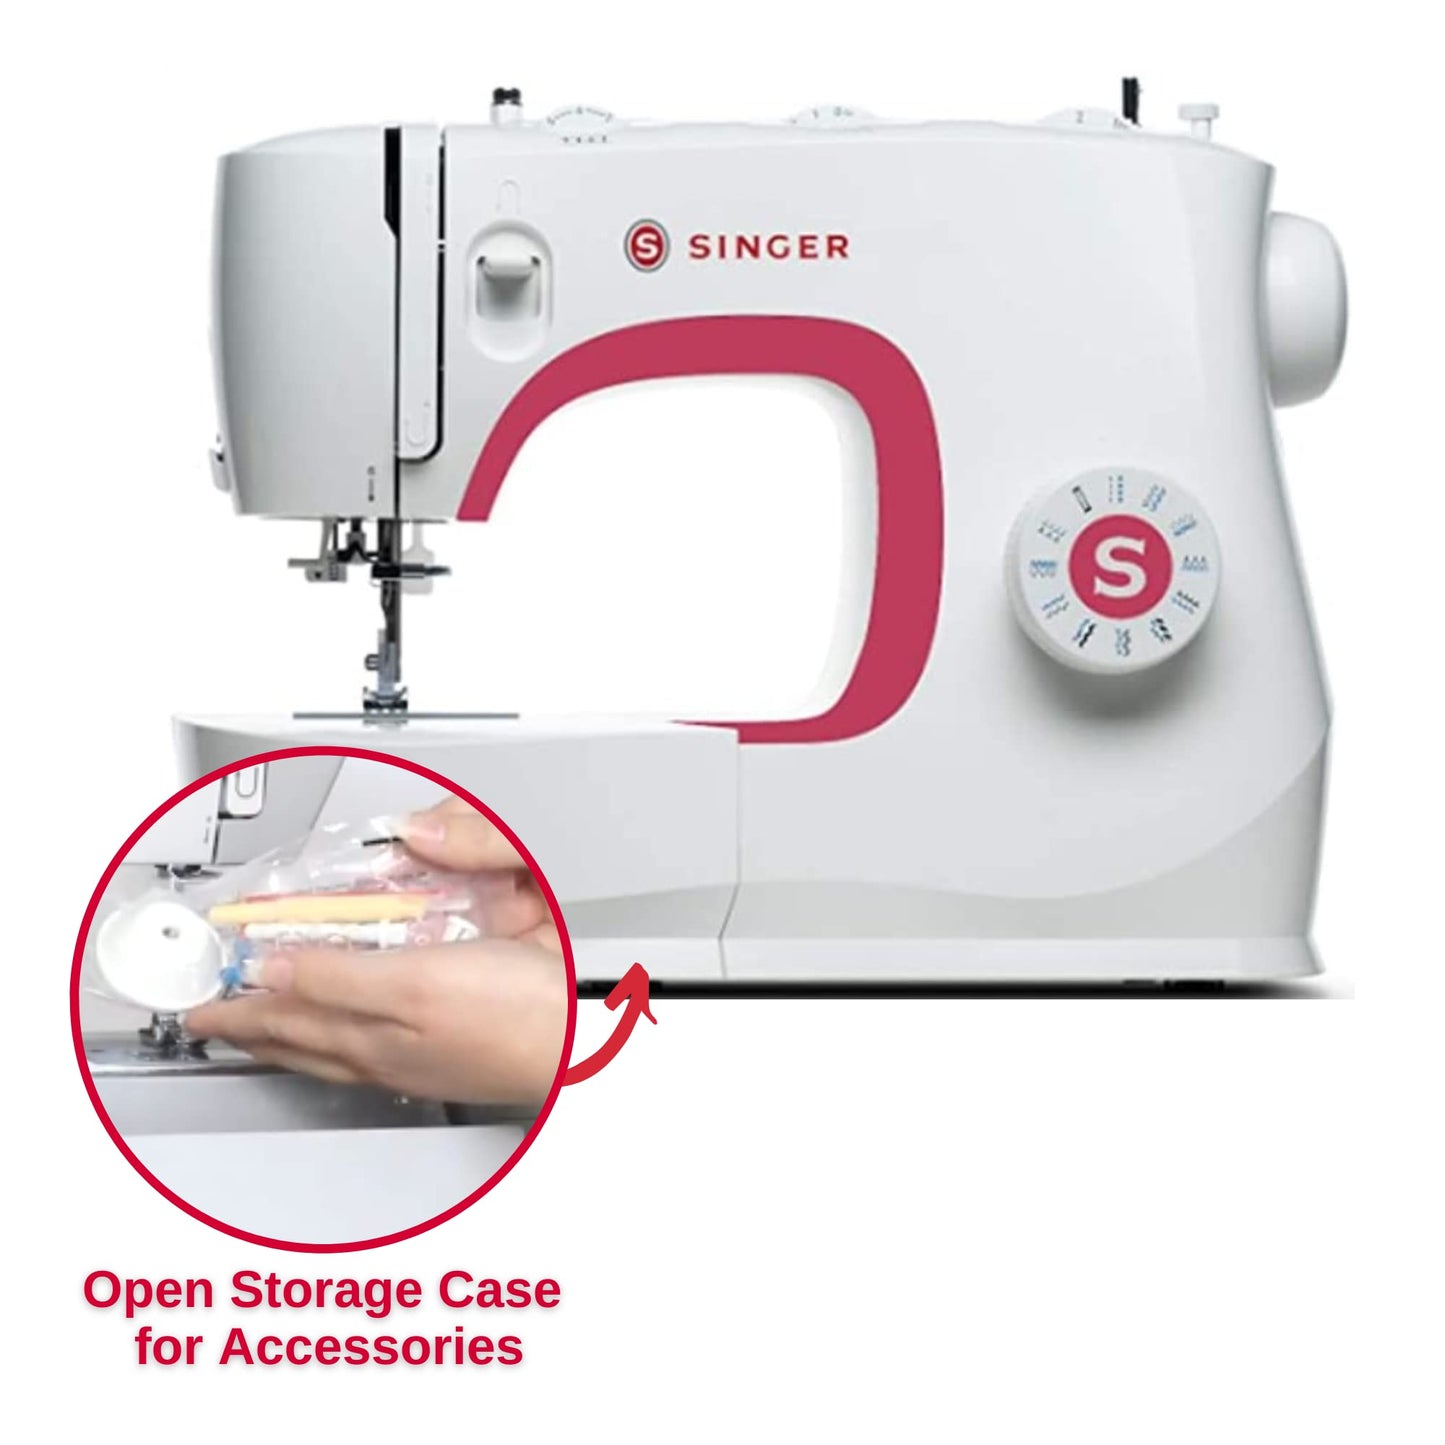 SINGER | MX231 Sewing Machine With Accessory Kit & Foot Pedal - 97 Stitch Applications - Simple & Great for Beginners